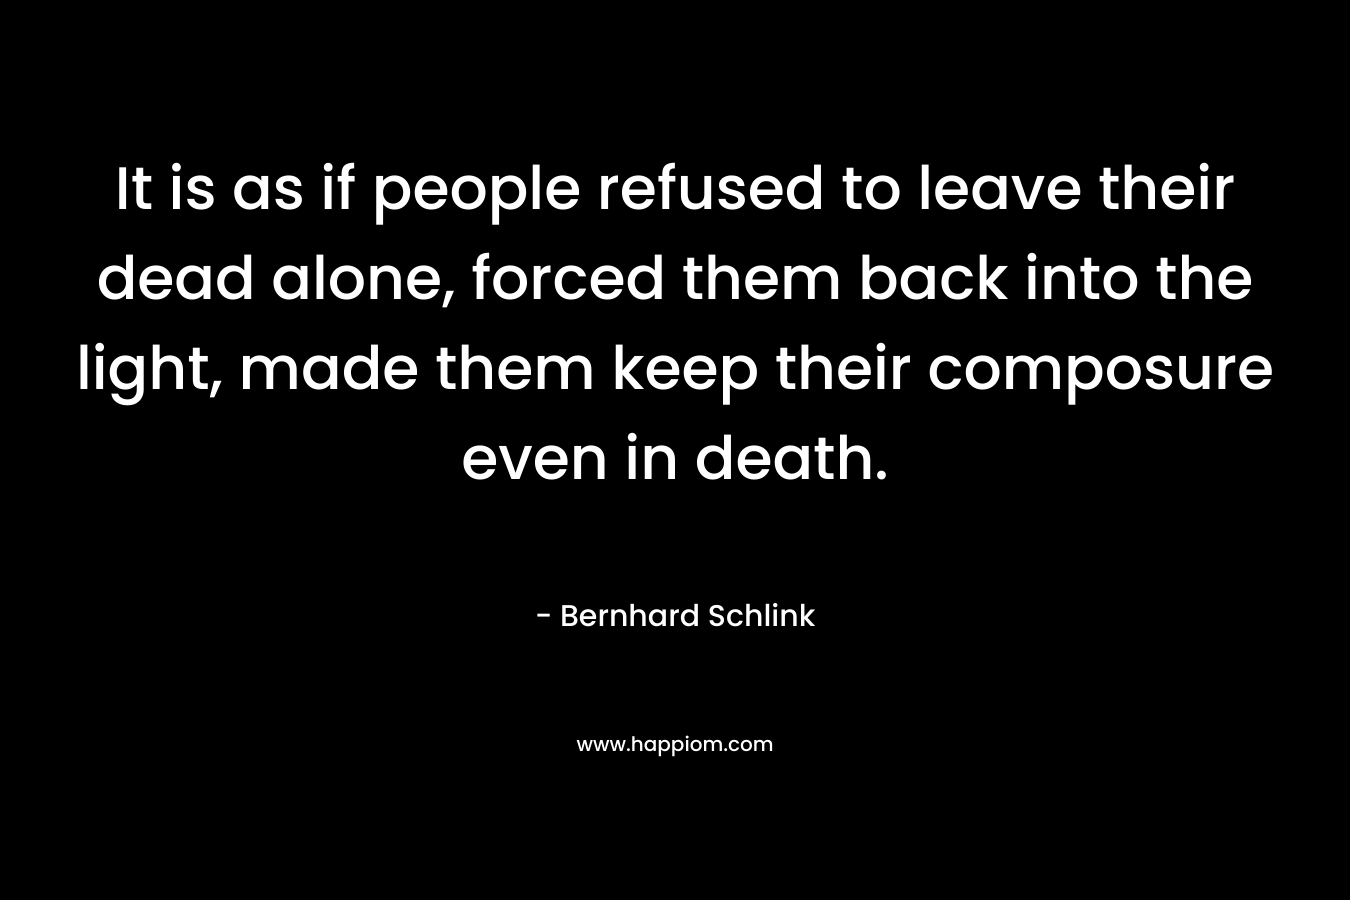 It is as if people refused to leave their dead alone, forced them back into the light, made them keep their composure even in death. – Bernhard Schlink